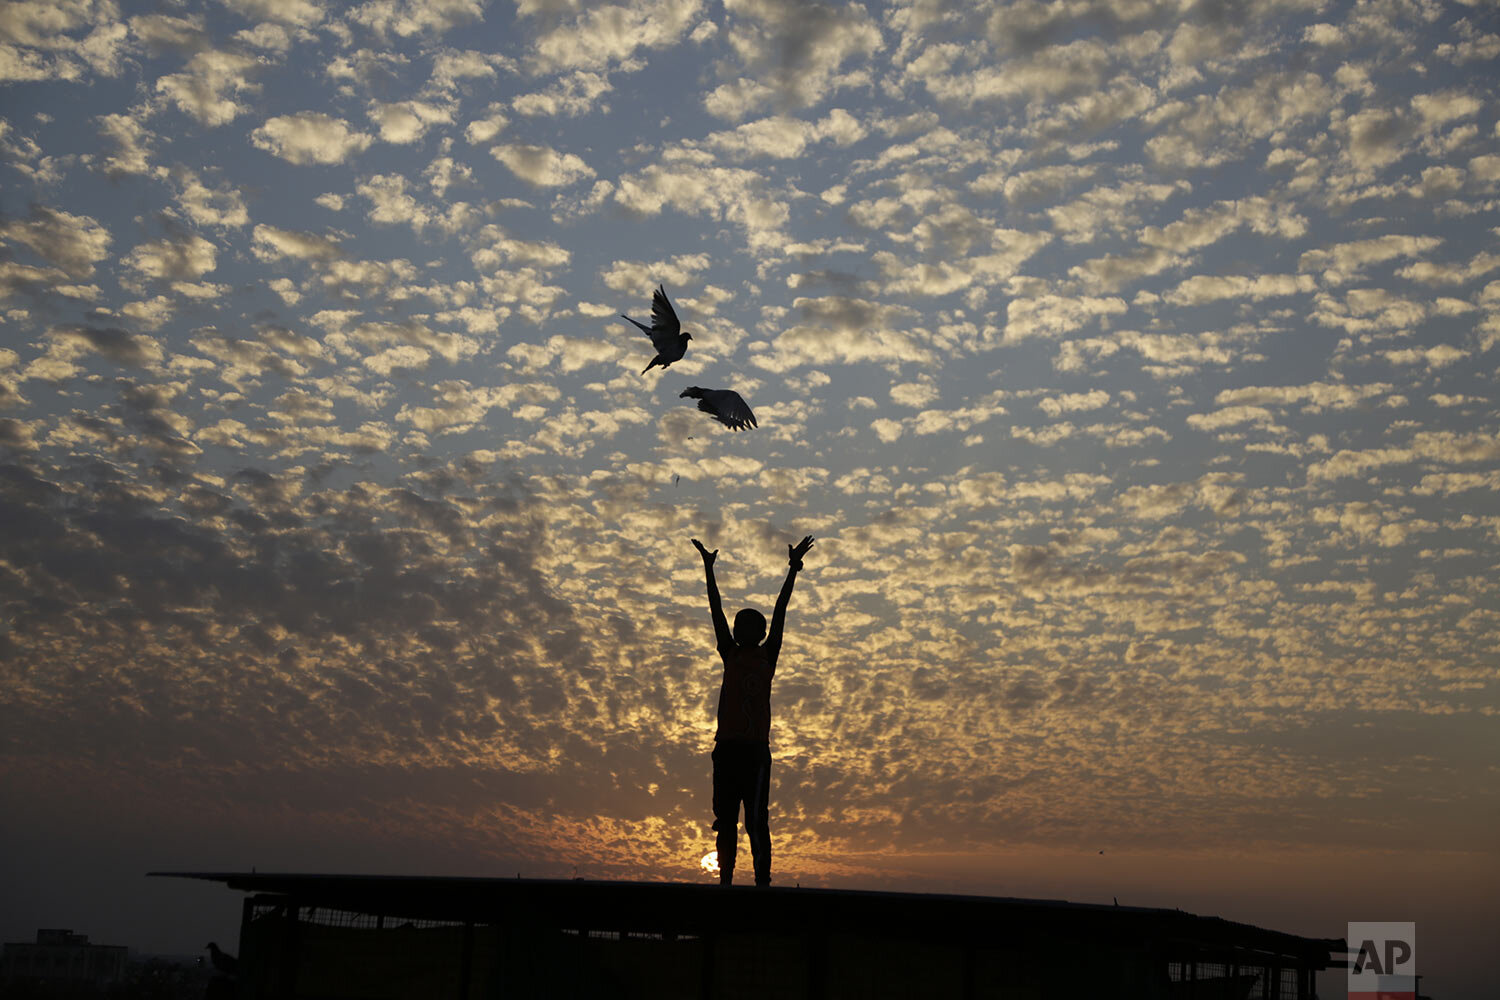  An Indian boy releases pigeons from terrace of his house in Ahmadabad, India, Monday, Jan. 27, 2020. (AP Photo/Ajit Solanki) 